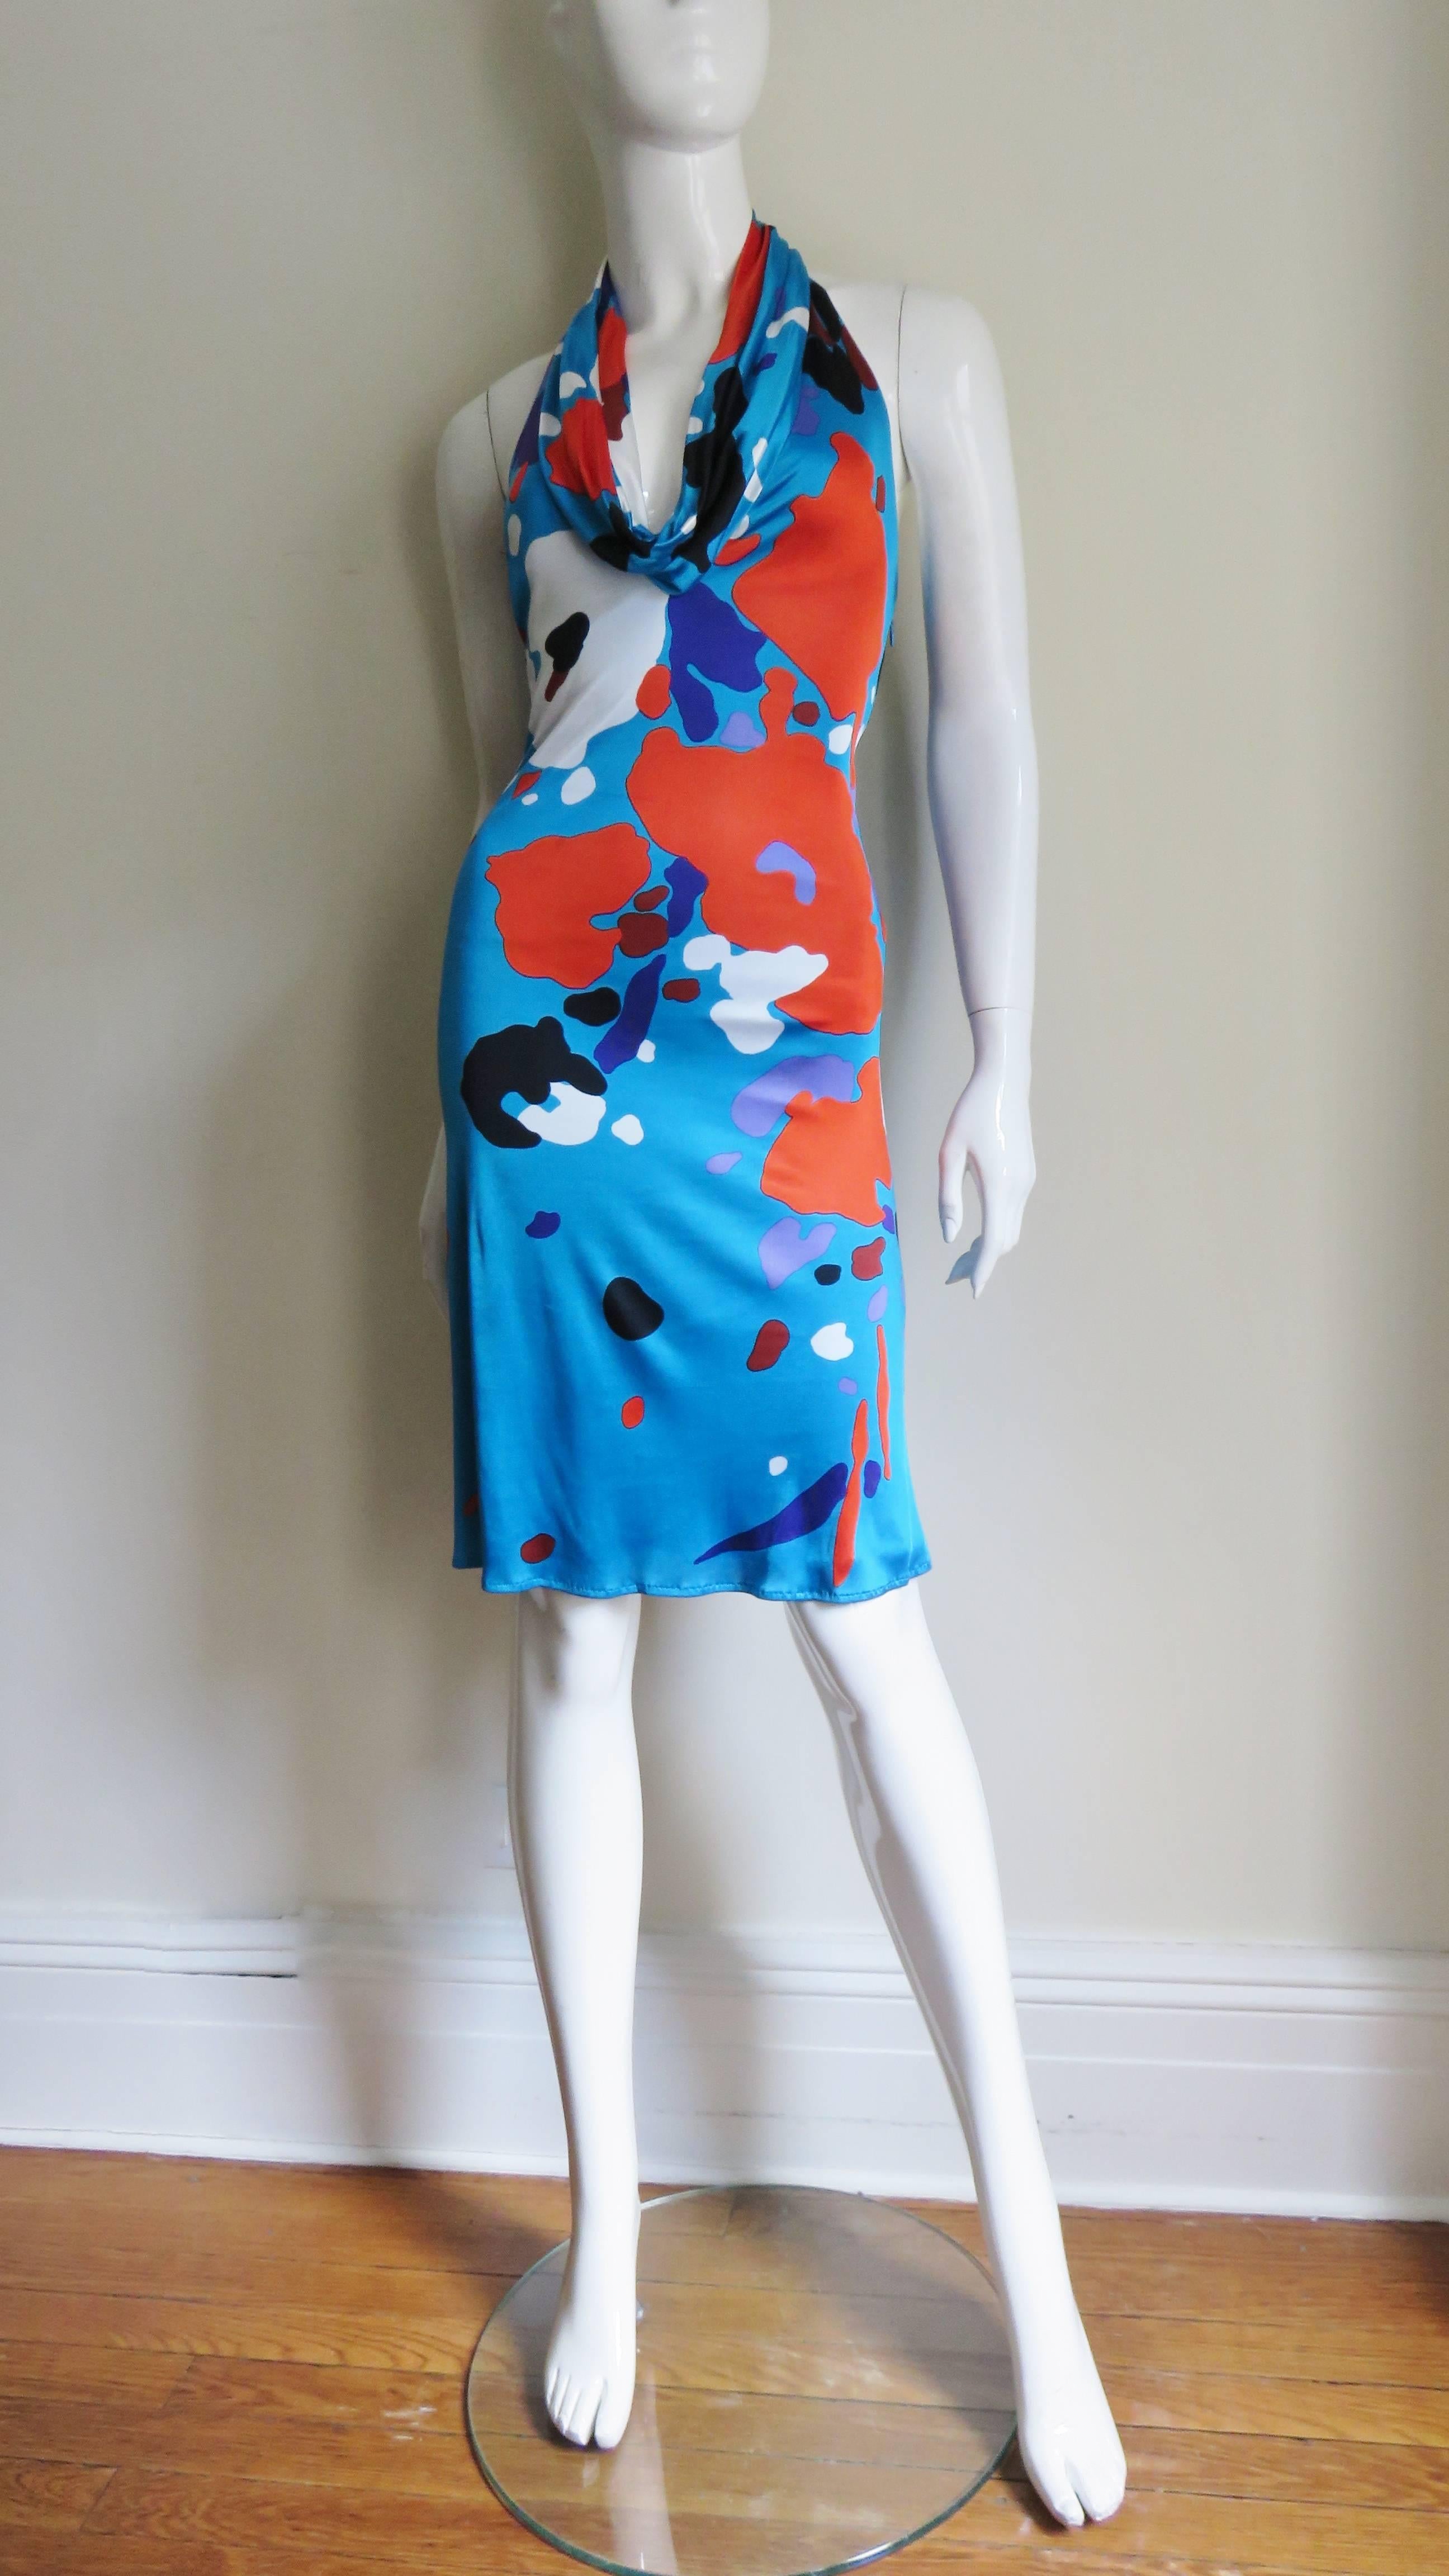 Women's 1990s Gianni Versace Plunging Halter Dress With Leather Strap Back